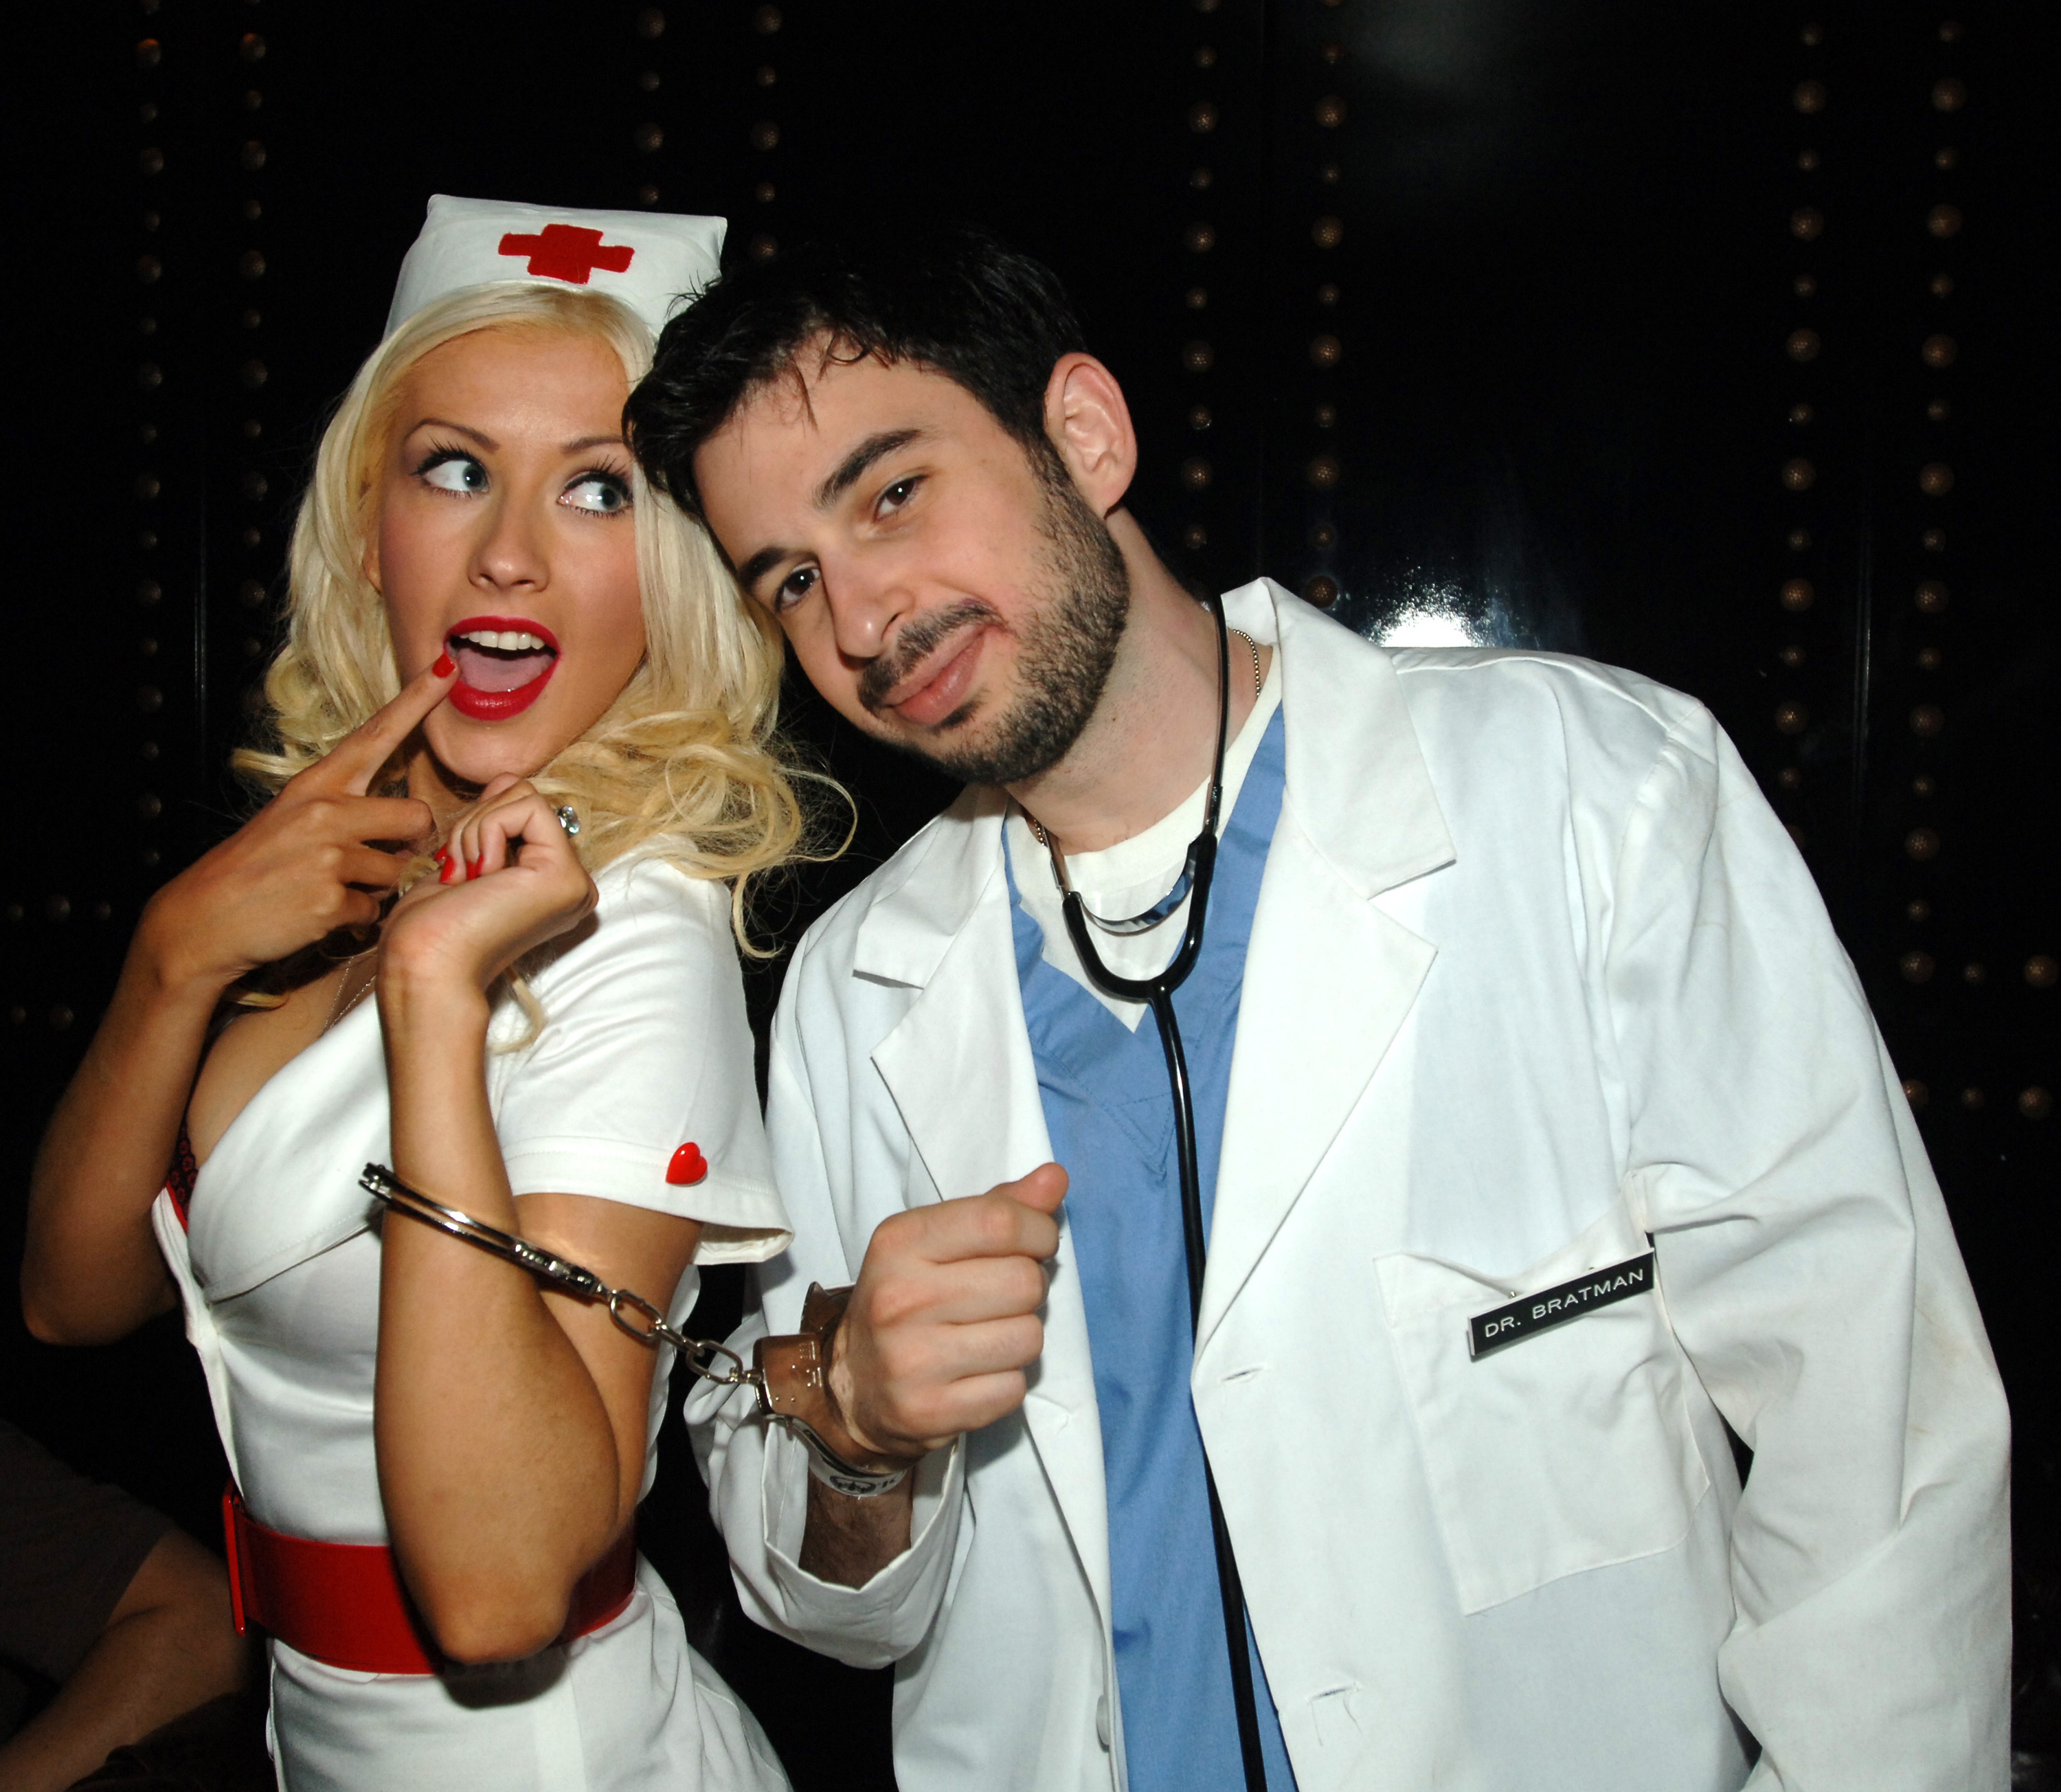 Christina Aguilera and Jordan Bratman during Christina Aguilera and Jordan Bratman Halloween party at The Hard Rock Hotel and Casino Resort on October 29, 2005 in Las Vegas, Nevada | Source: Getty Images